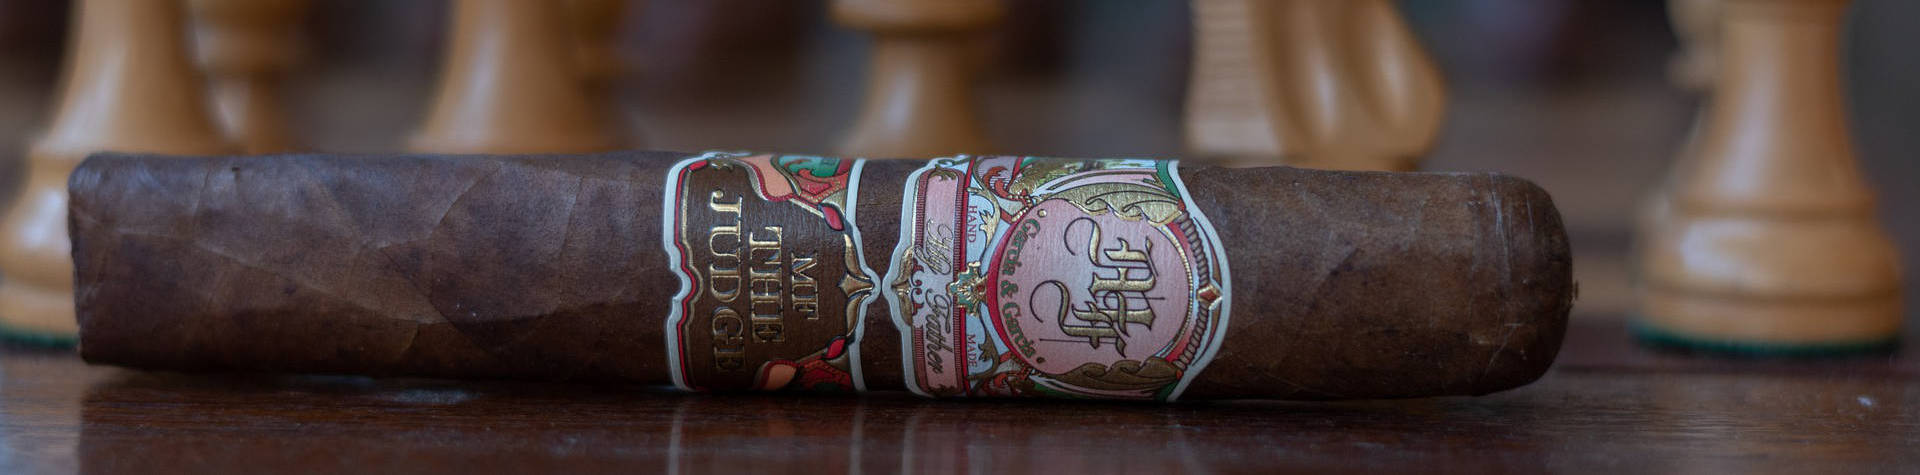 My Father Cigars include some great smokes including The Judge, Don Pepin Garcia, Jaime Garcia and the incredibly popular Flor de las Antillas. Pick up your favorite smoke now!